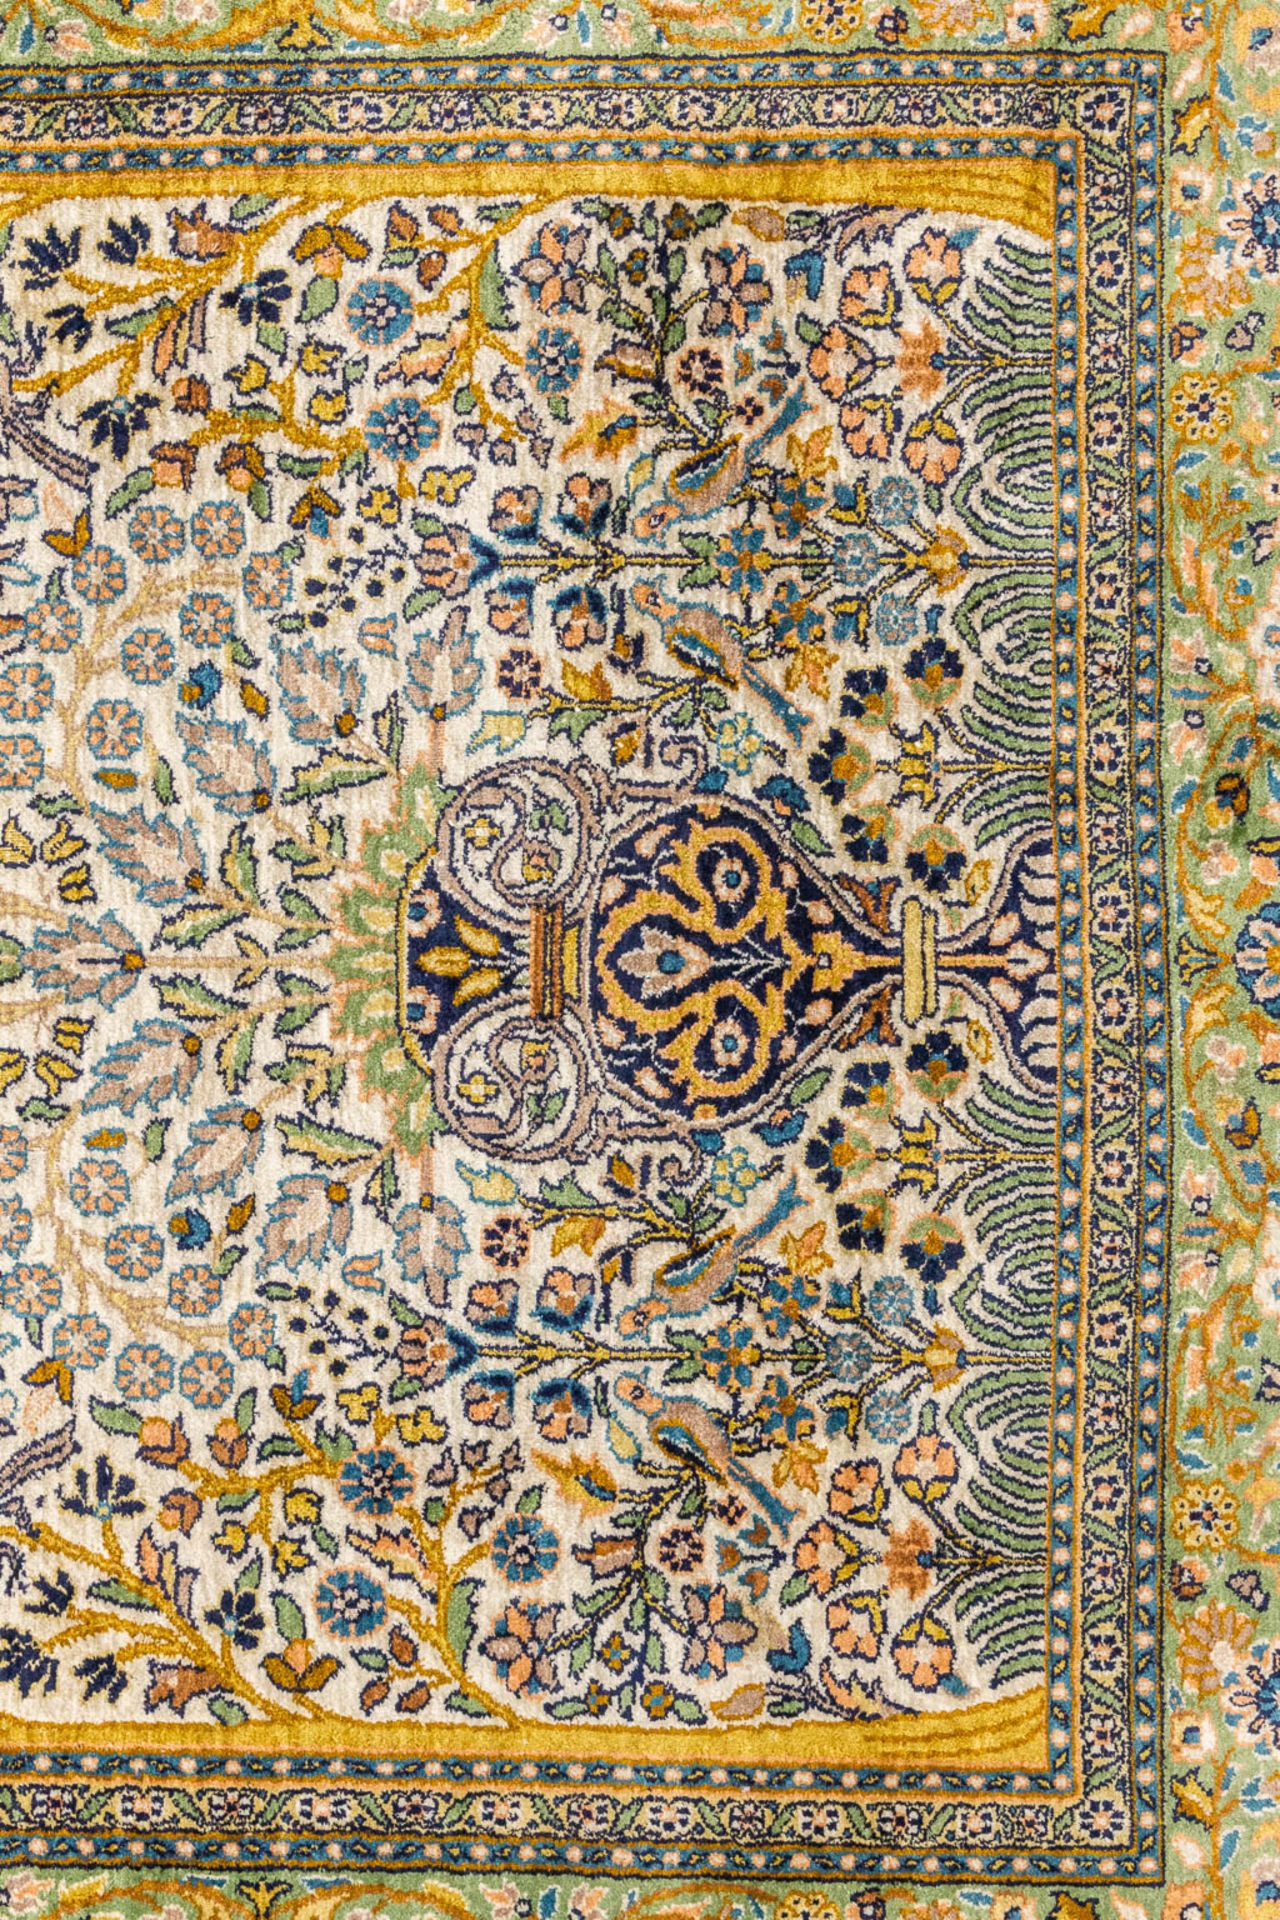 An Oriental, hand-made carpet, 'Isfahan' 181 x 124 - Image 7 of 7